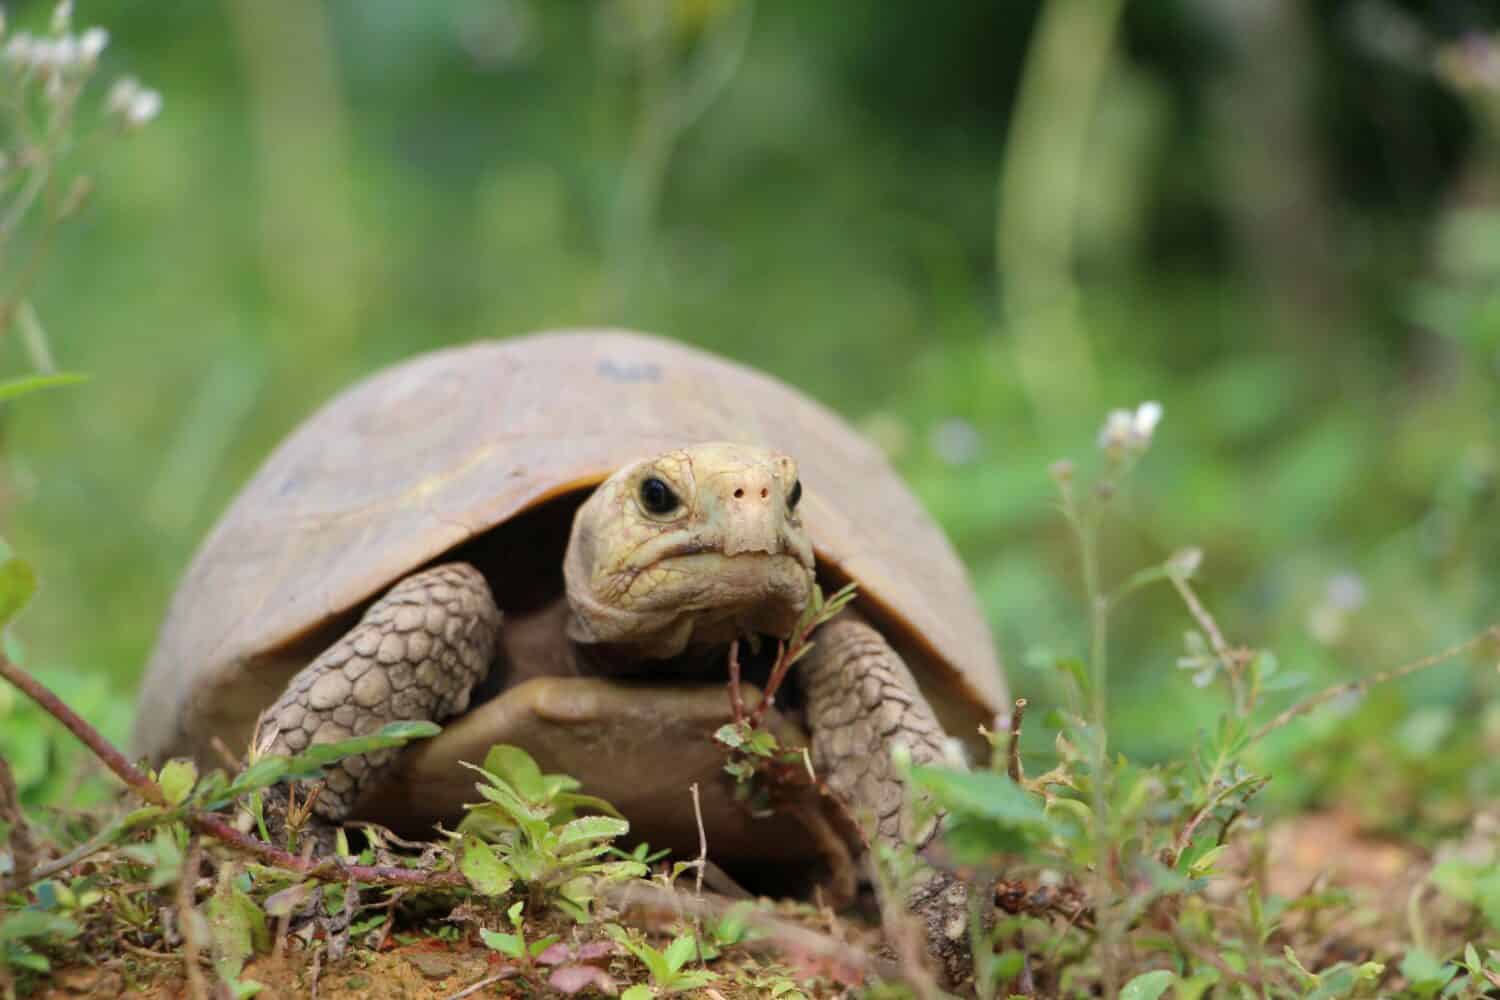 Elongated tortoise in the nature, Indotestudo elongata ,Tortoise sunbathe on ground with his protective shell ,Tortoise from Southeast Asia and parts of South Asia ,High yellow Tortoise